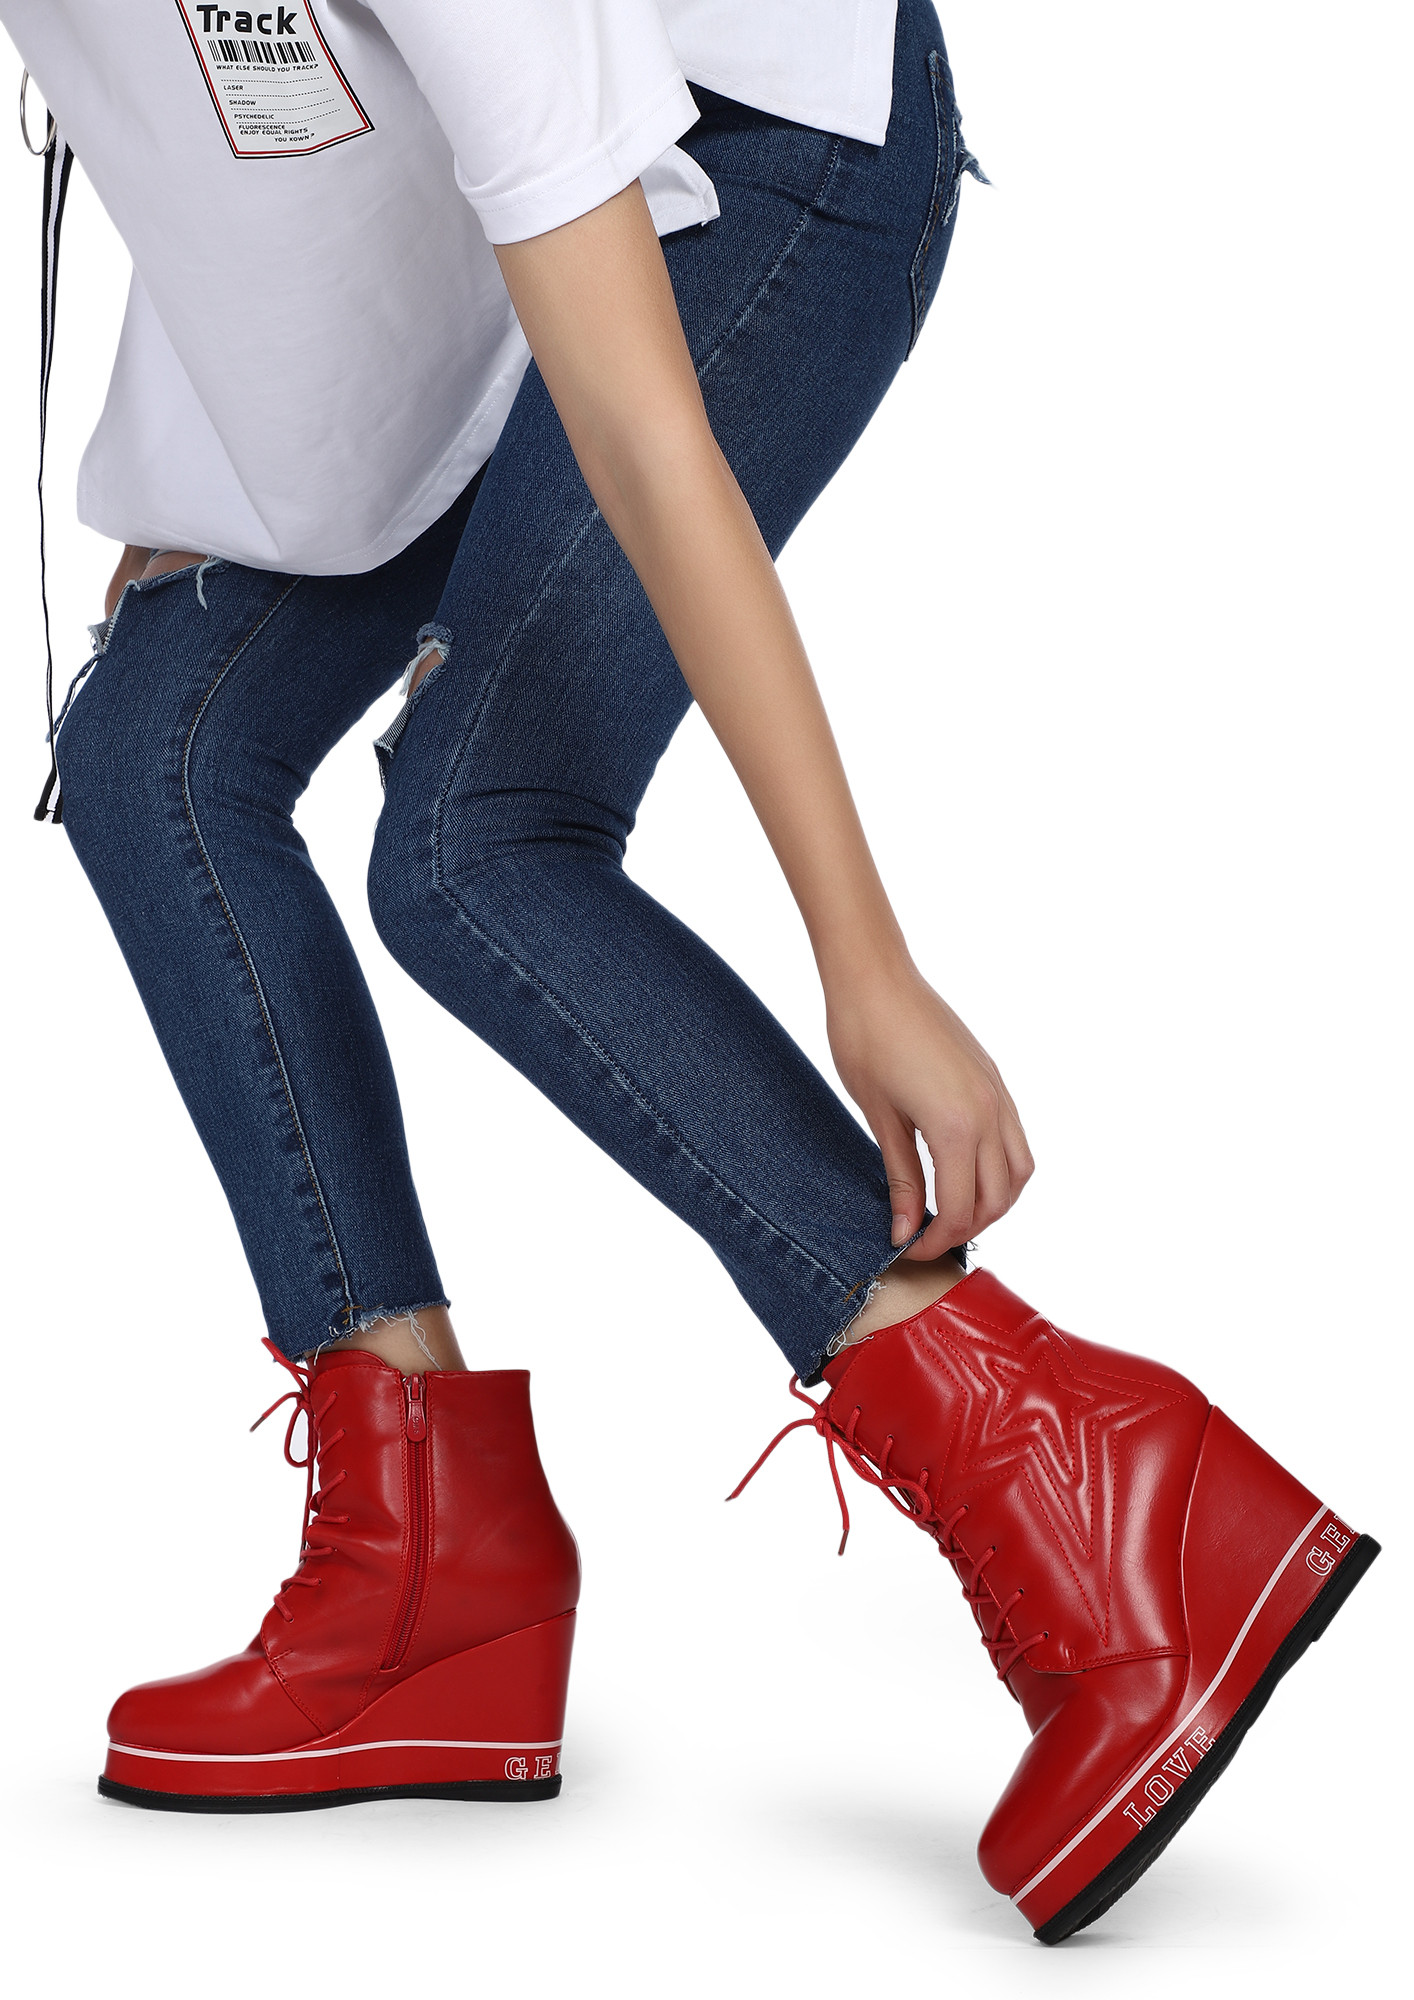 I'M STAR STRUCK RED ANKLE BOOTS